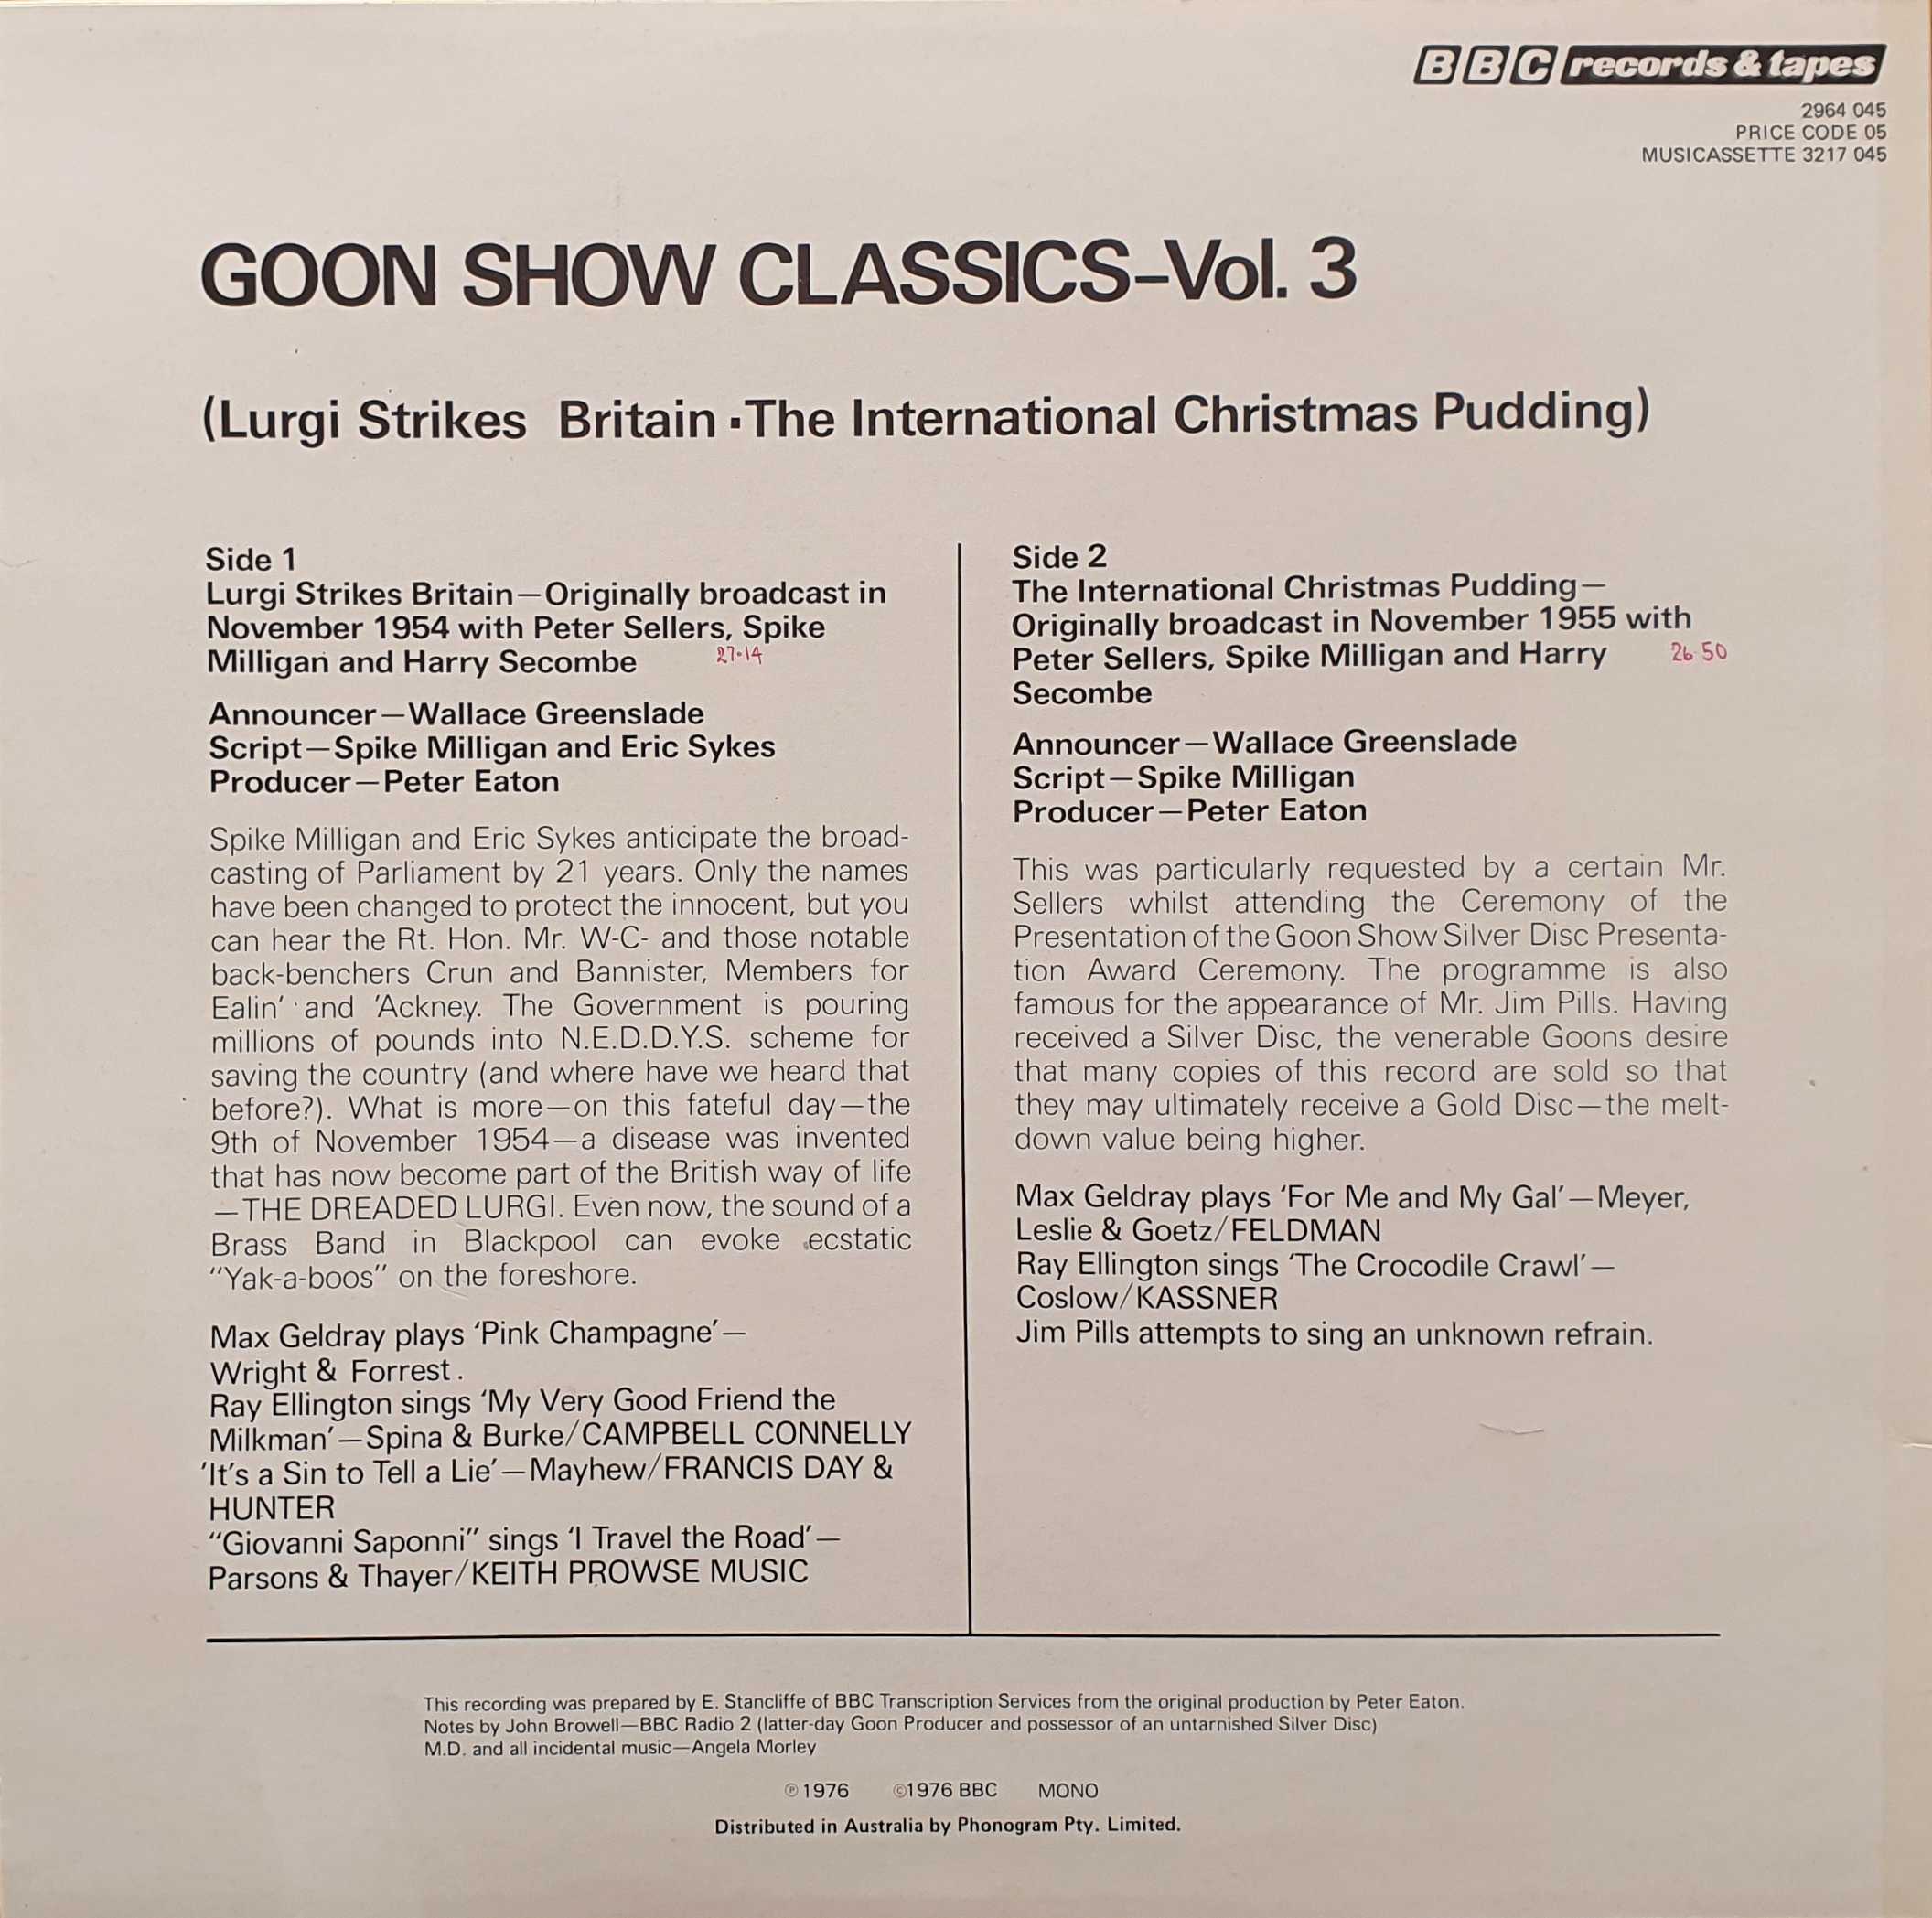 Picture of 2964 045 Goon Show classics vol. 3 by artist The Goon Show from the BBC records and Tapes library